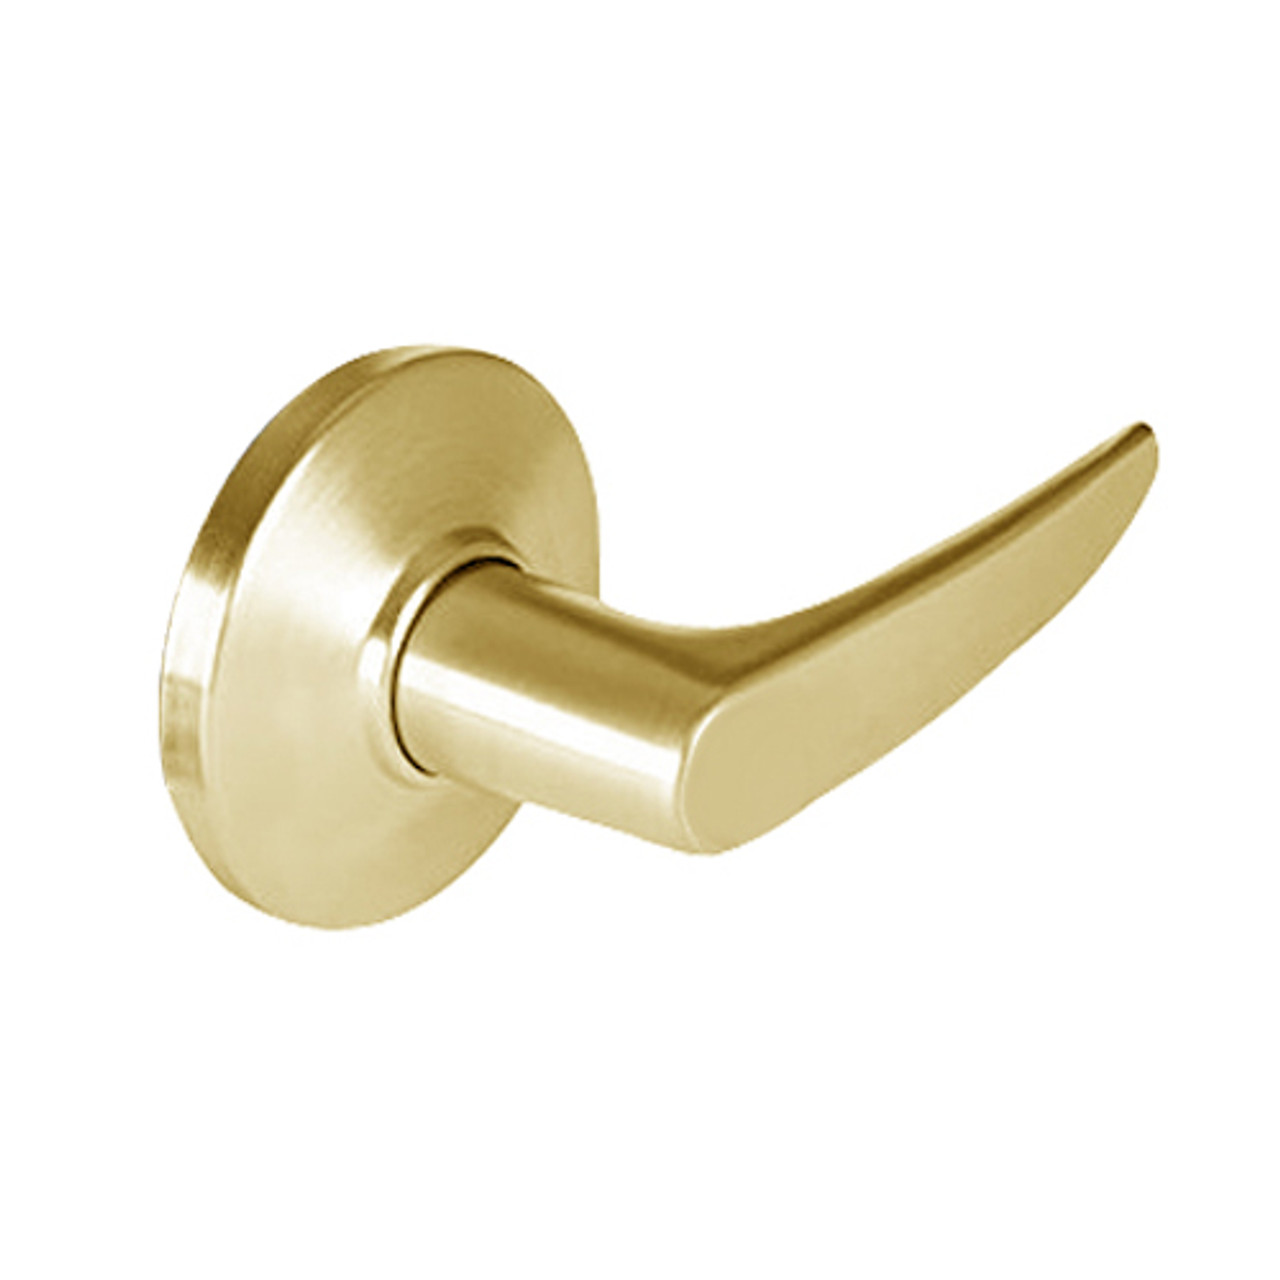 9K30M16DSTK605 Best 9K Series Communicating Heavy Duty Cylindrical Lever Locks with Curved Without Return Lever Design in Bright Brass